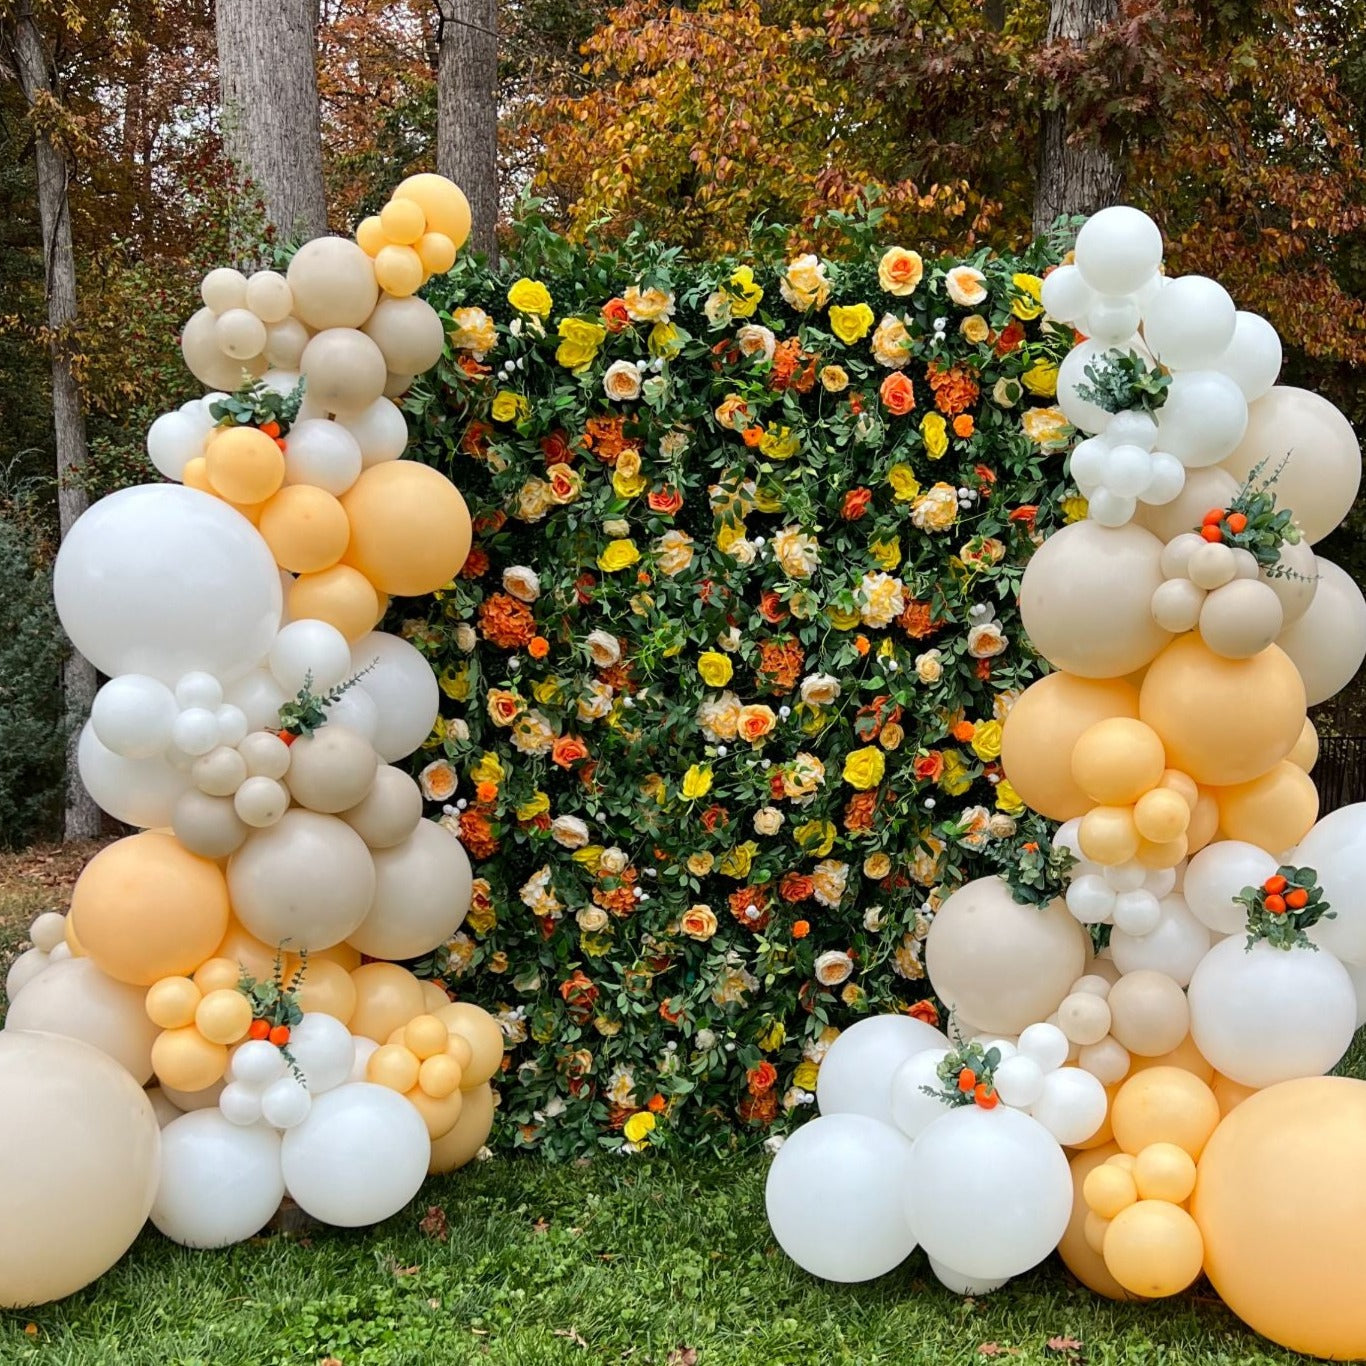 Flower Wall Green Orange Rolling Up Curtain Fabric Artificial Flower Wall Backdrop Proposal Wedding Party Decor